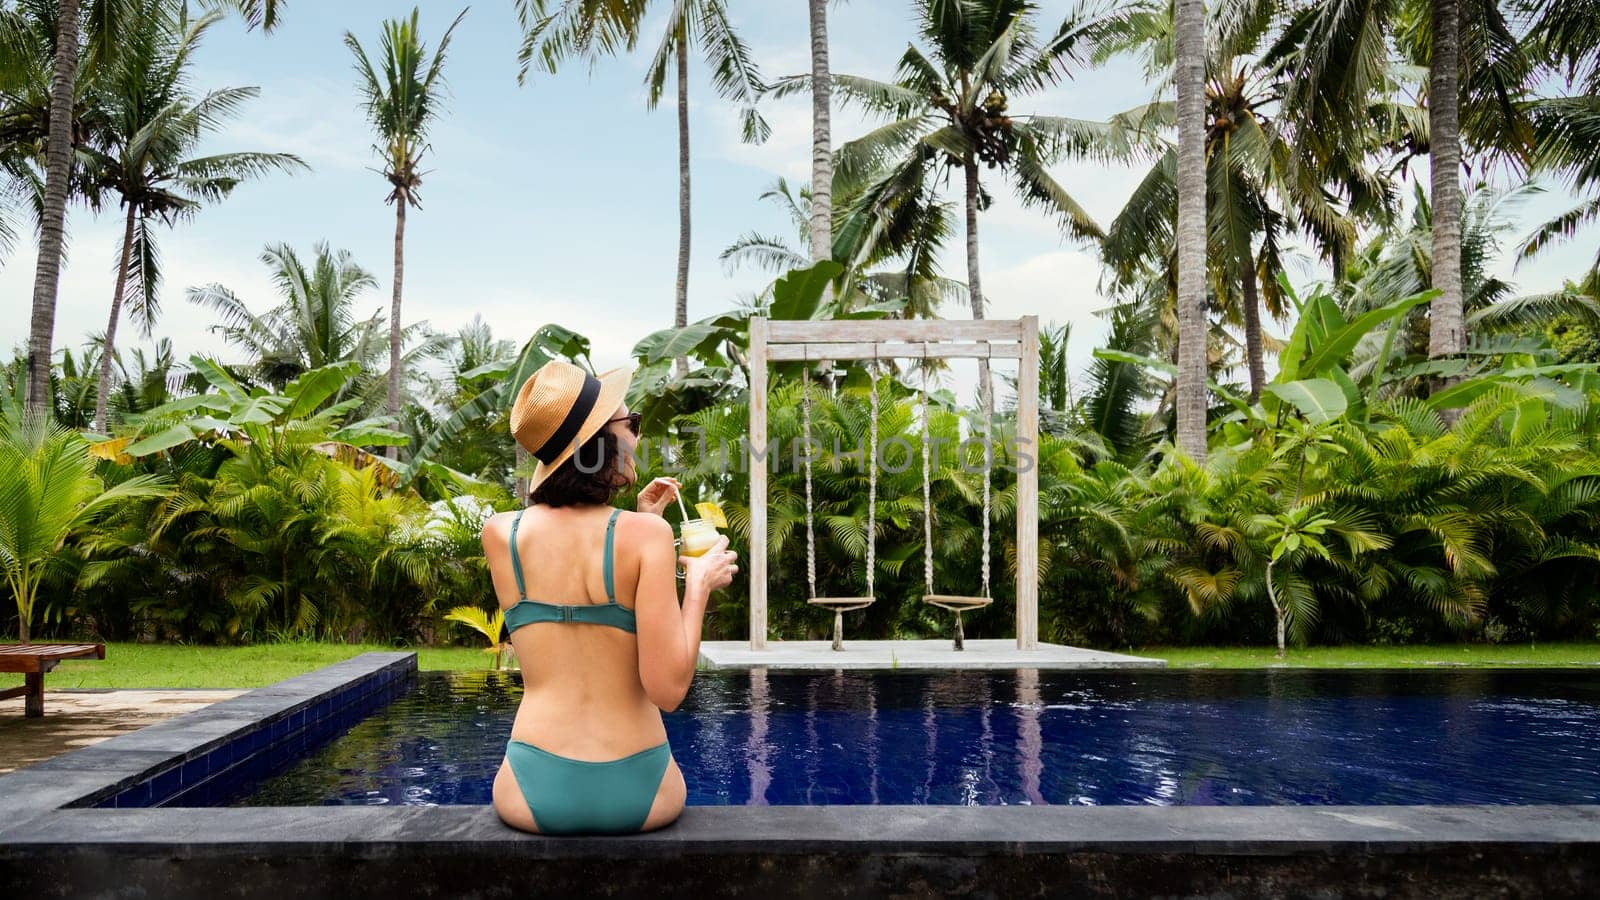 Rear view of young female relaxing in the swimming pool drinking pineapple juice on tropical vacation resort. Copy space. Panoramic image. Summer vacation concept.